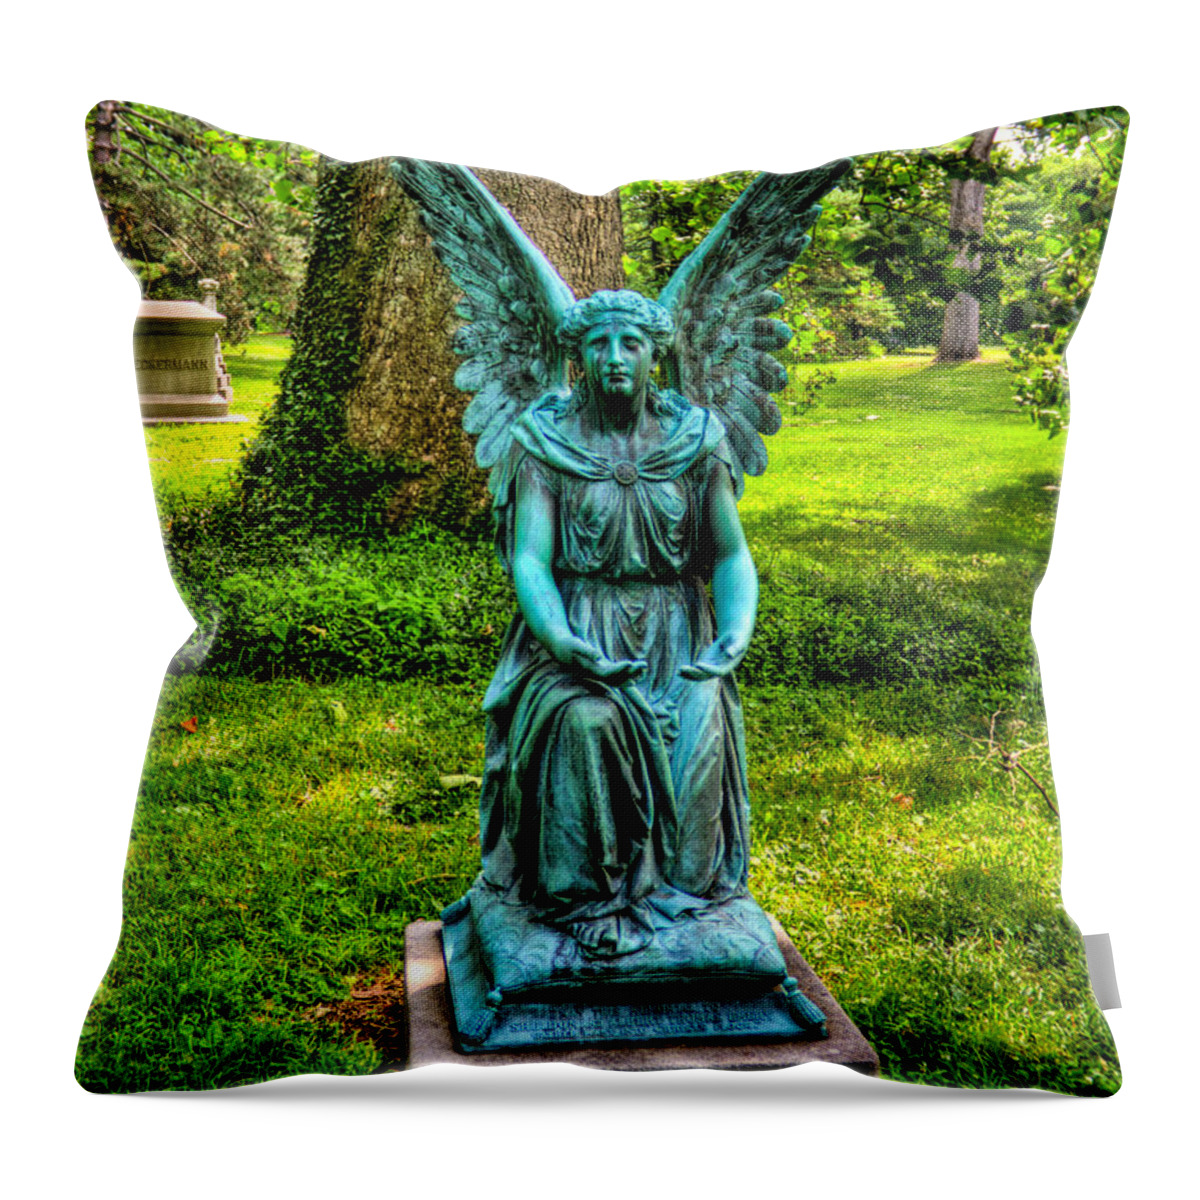 Spring Grove Throw Pillow featuring the photograph Spring Grove Angel by Jonny D